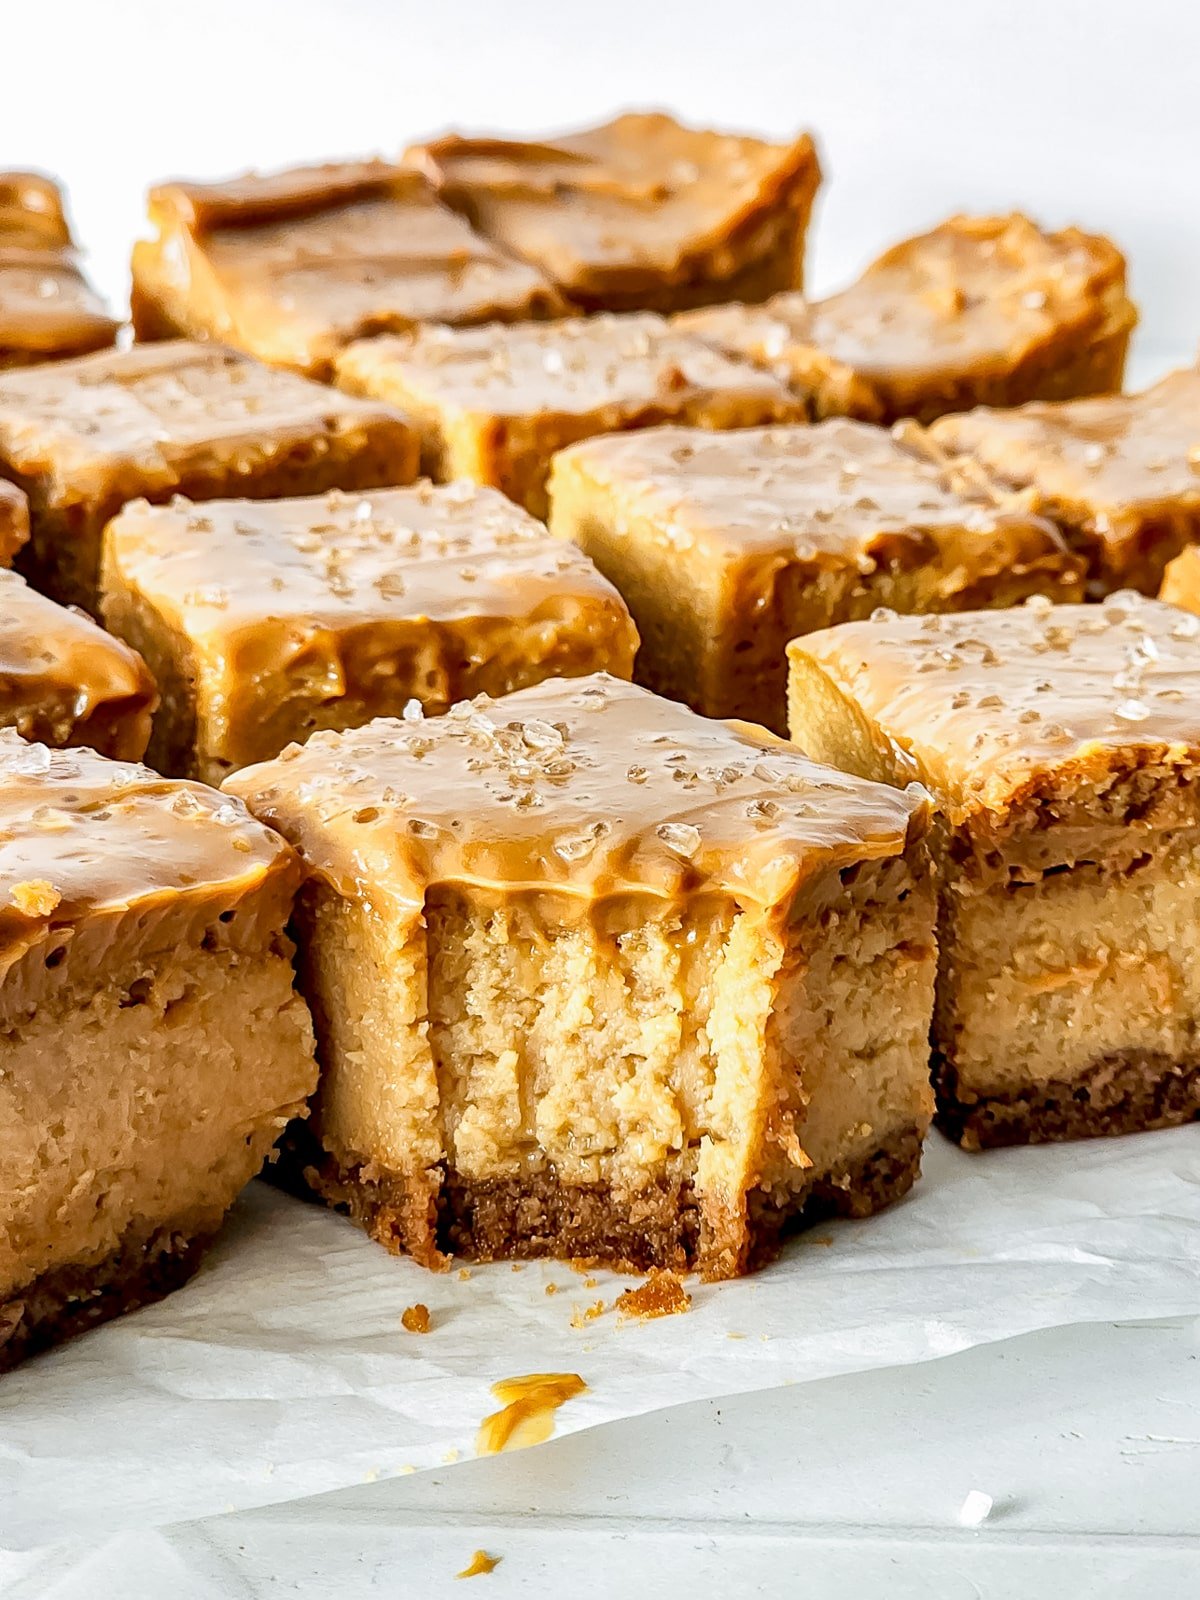 Dulce de Leche Cheesecake with a bite taken out